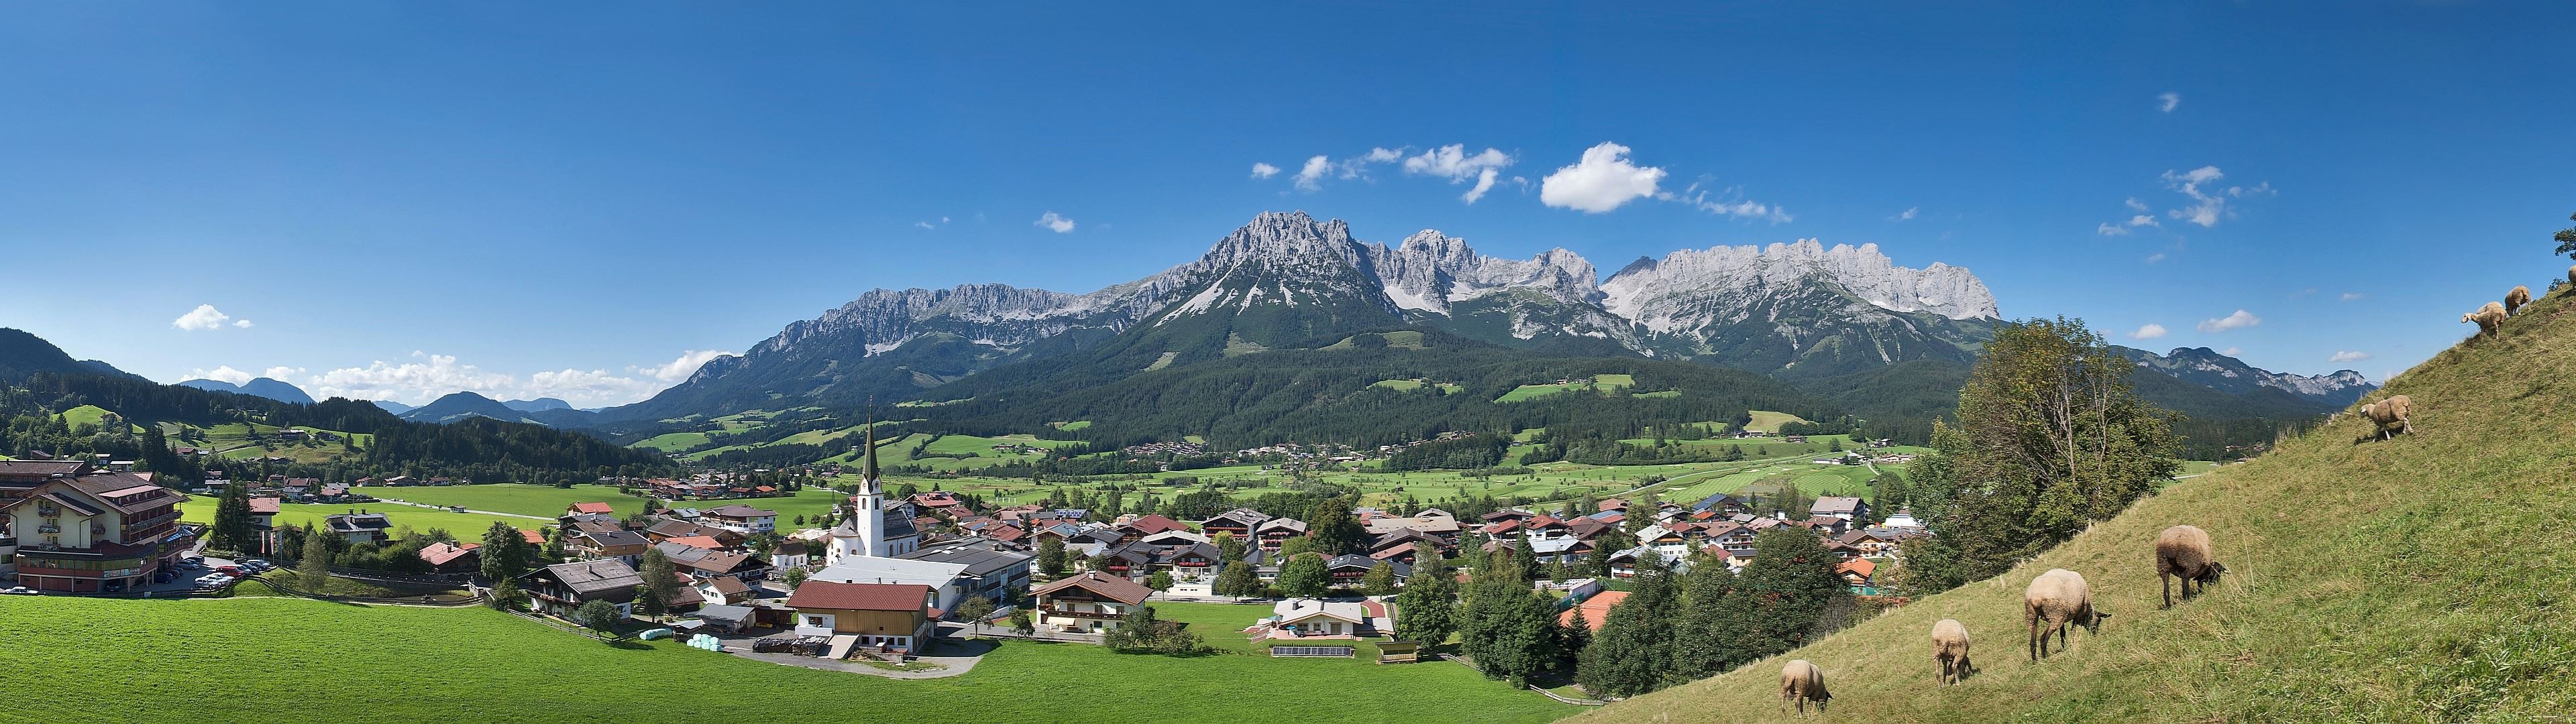 Landscape Austria Town Valley Mountains Sheep Multiple Display Dual Monitors 3840x1080